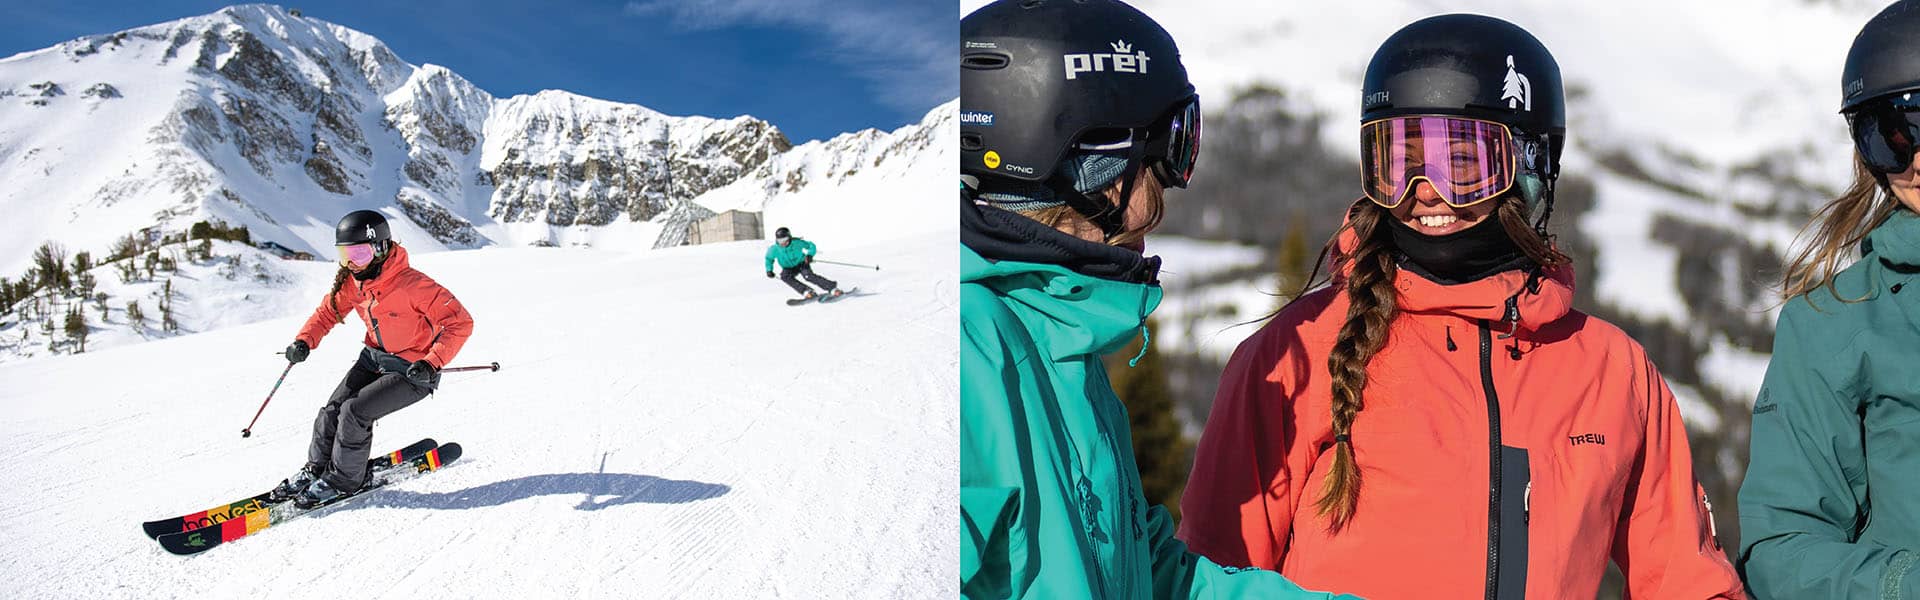 Side-by-side images of skiers